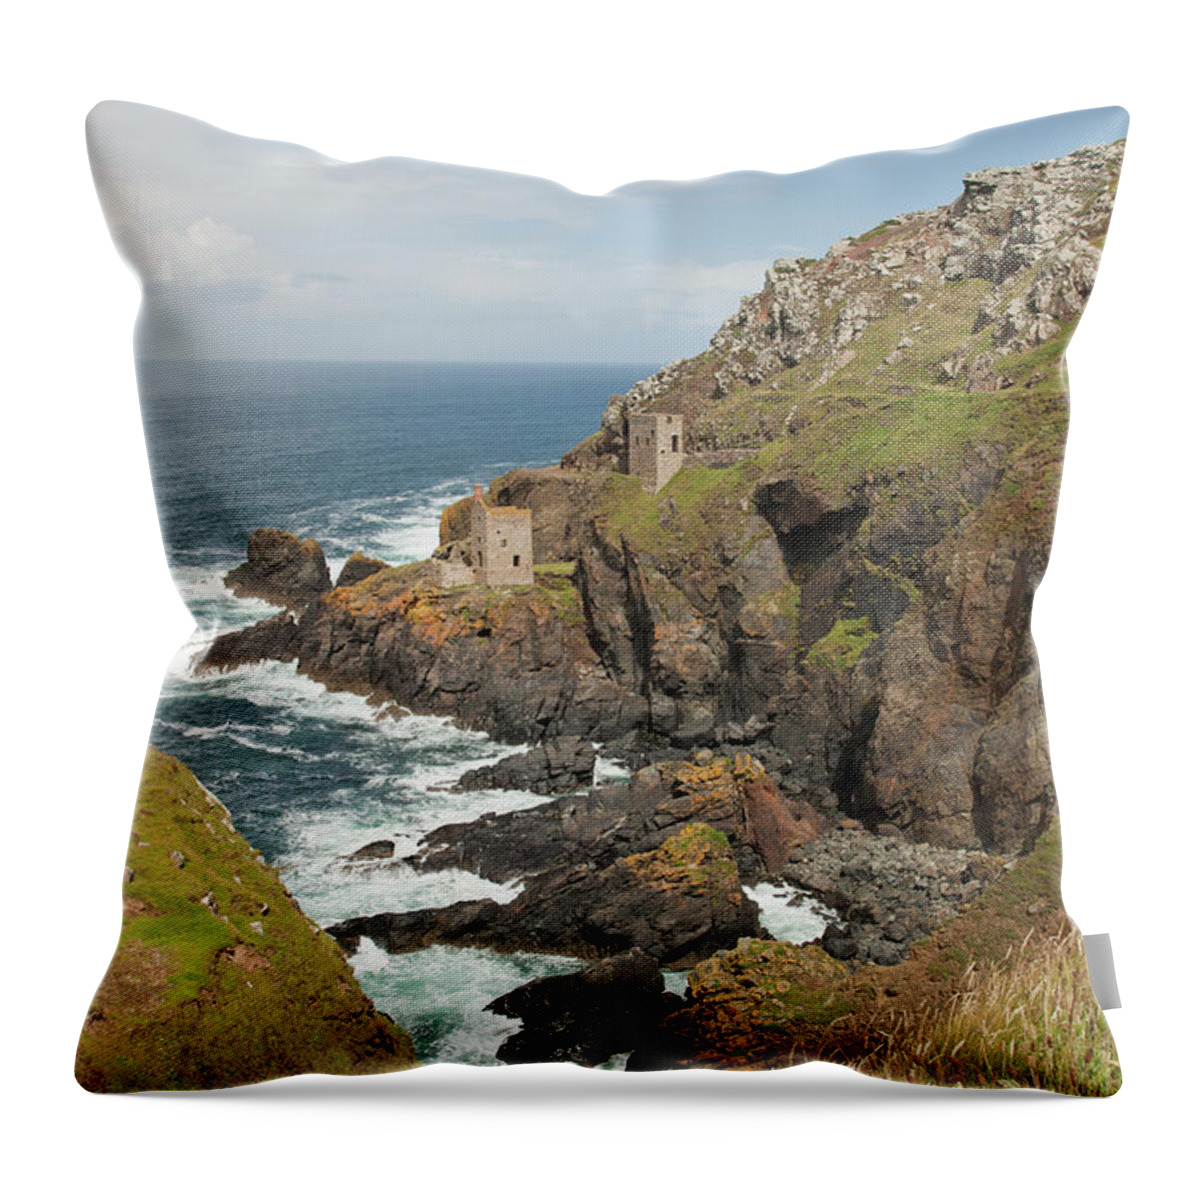 Architectural Feature Throw Pillow featuring the photograph Cornish Coastline by Paulaconnelly